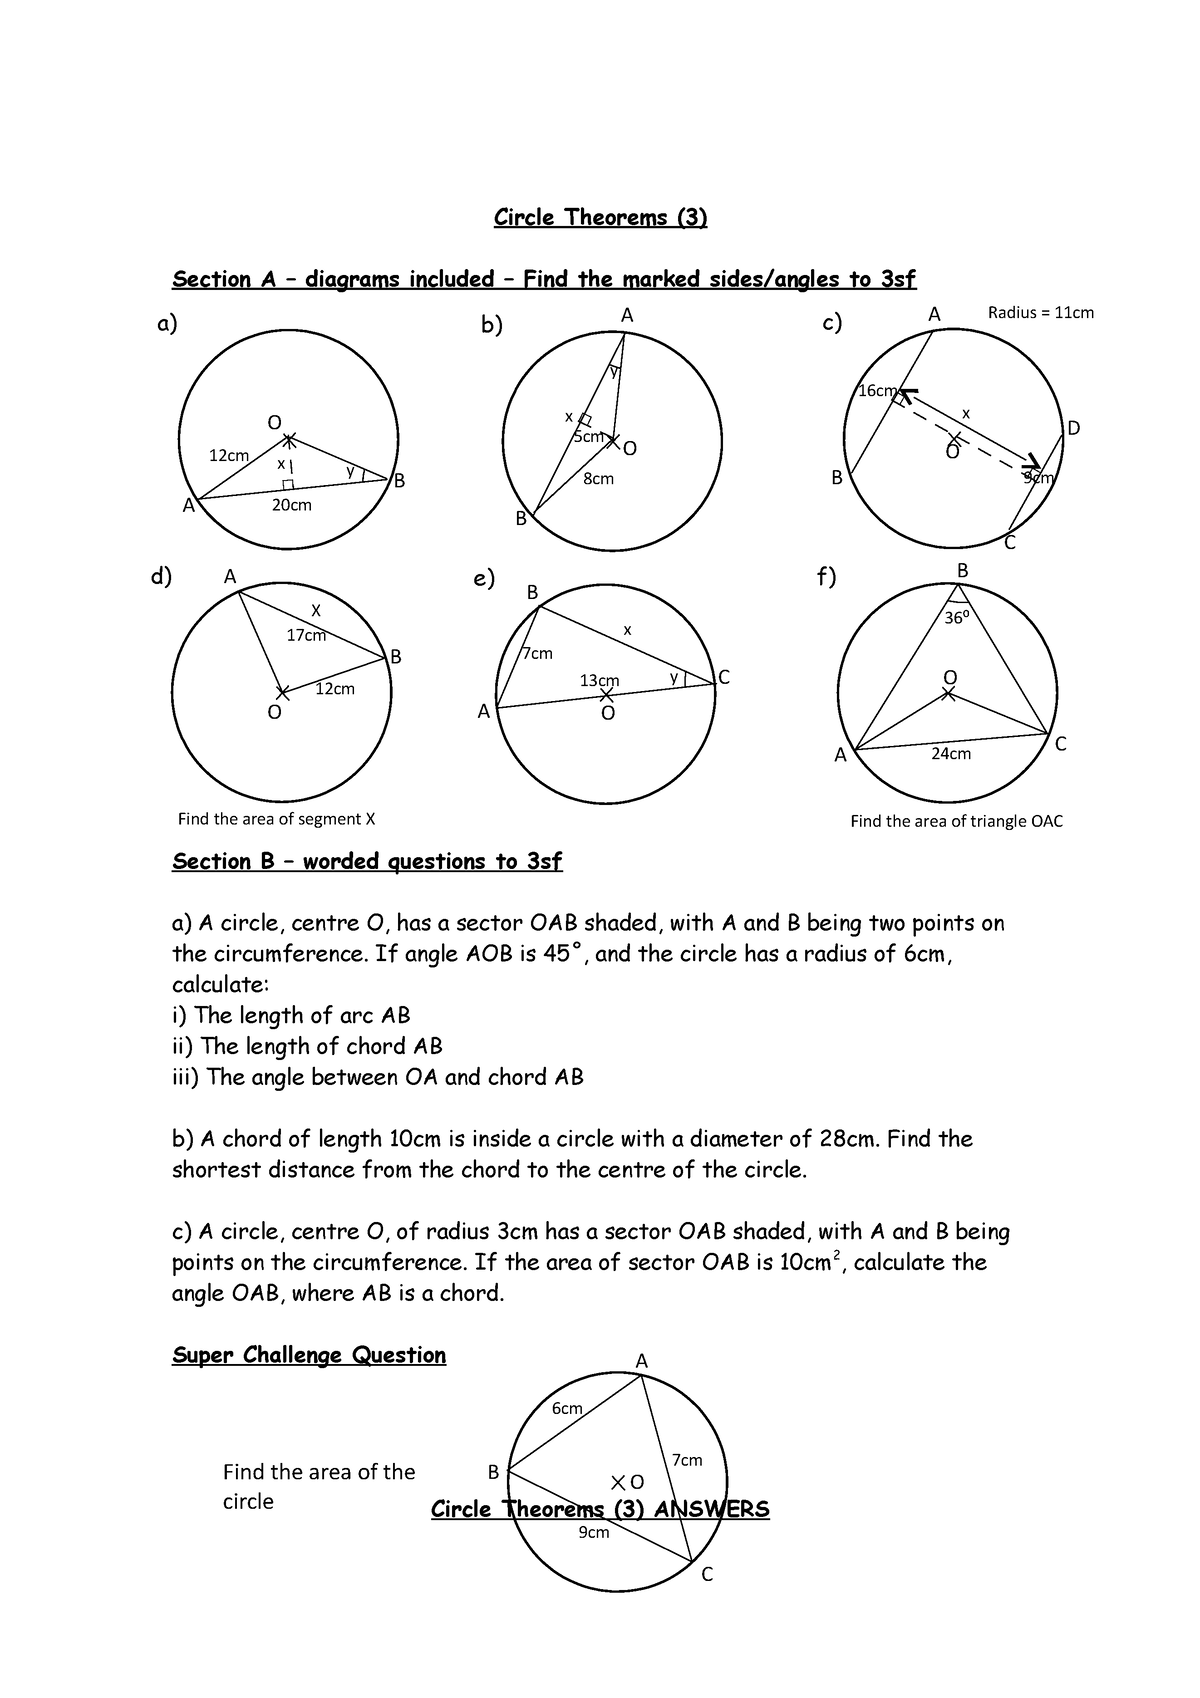 Circle Theorems Materials You Could Use For The Classroom A B C D E O A B 6cm 7cm 9cm Find Studocu